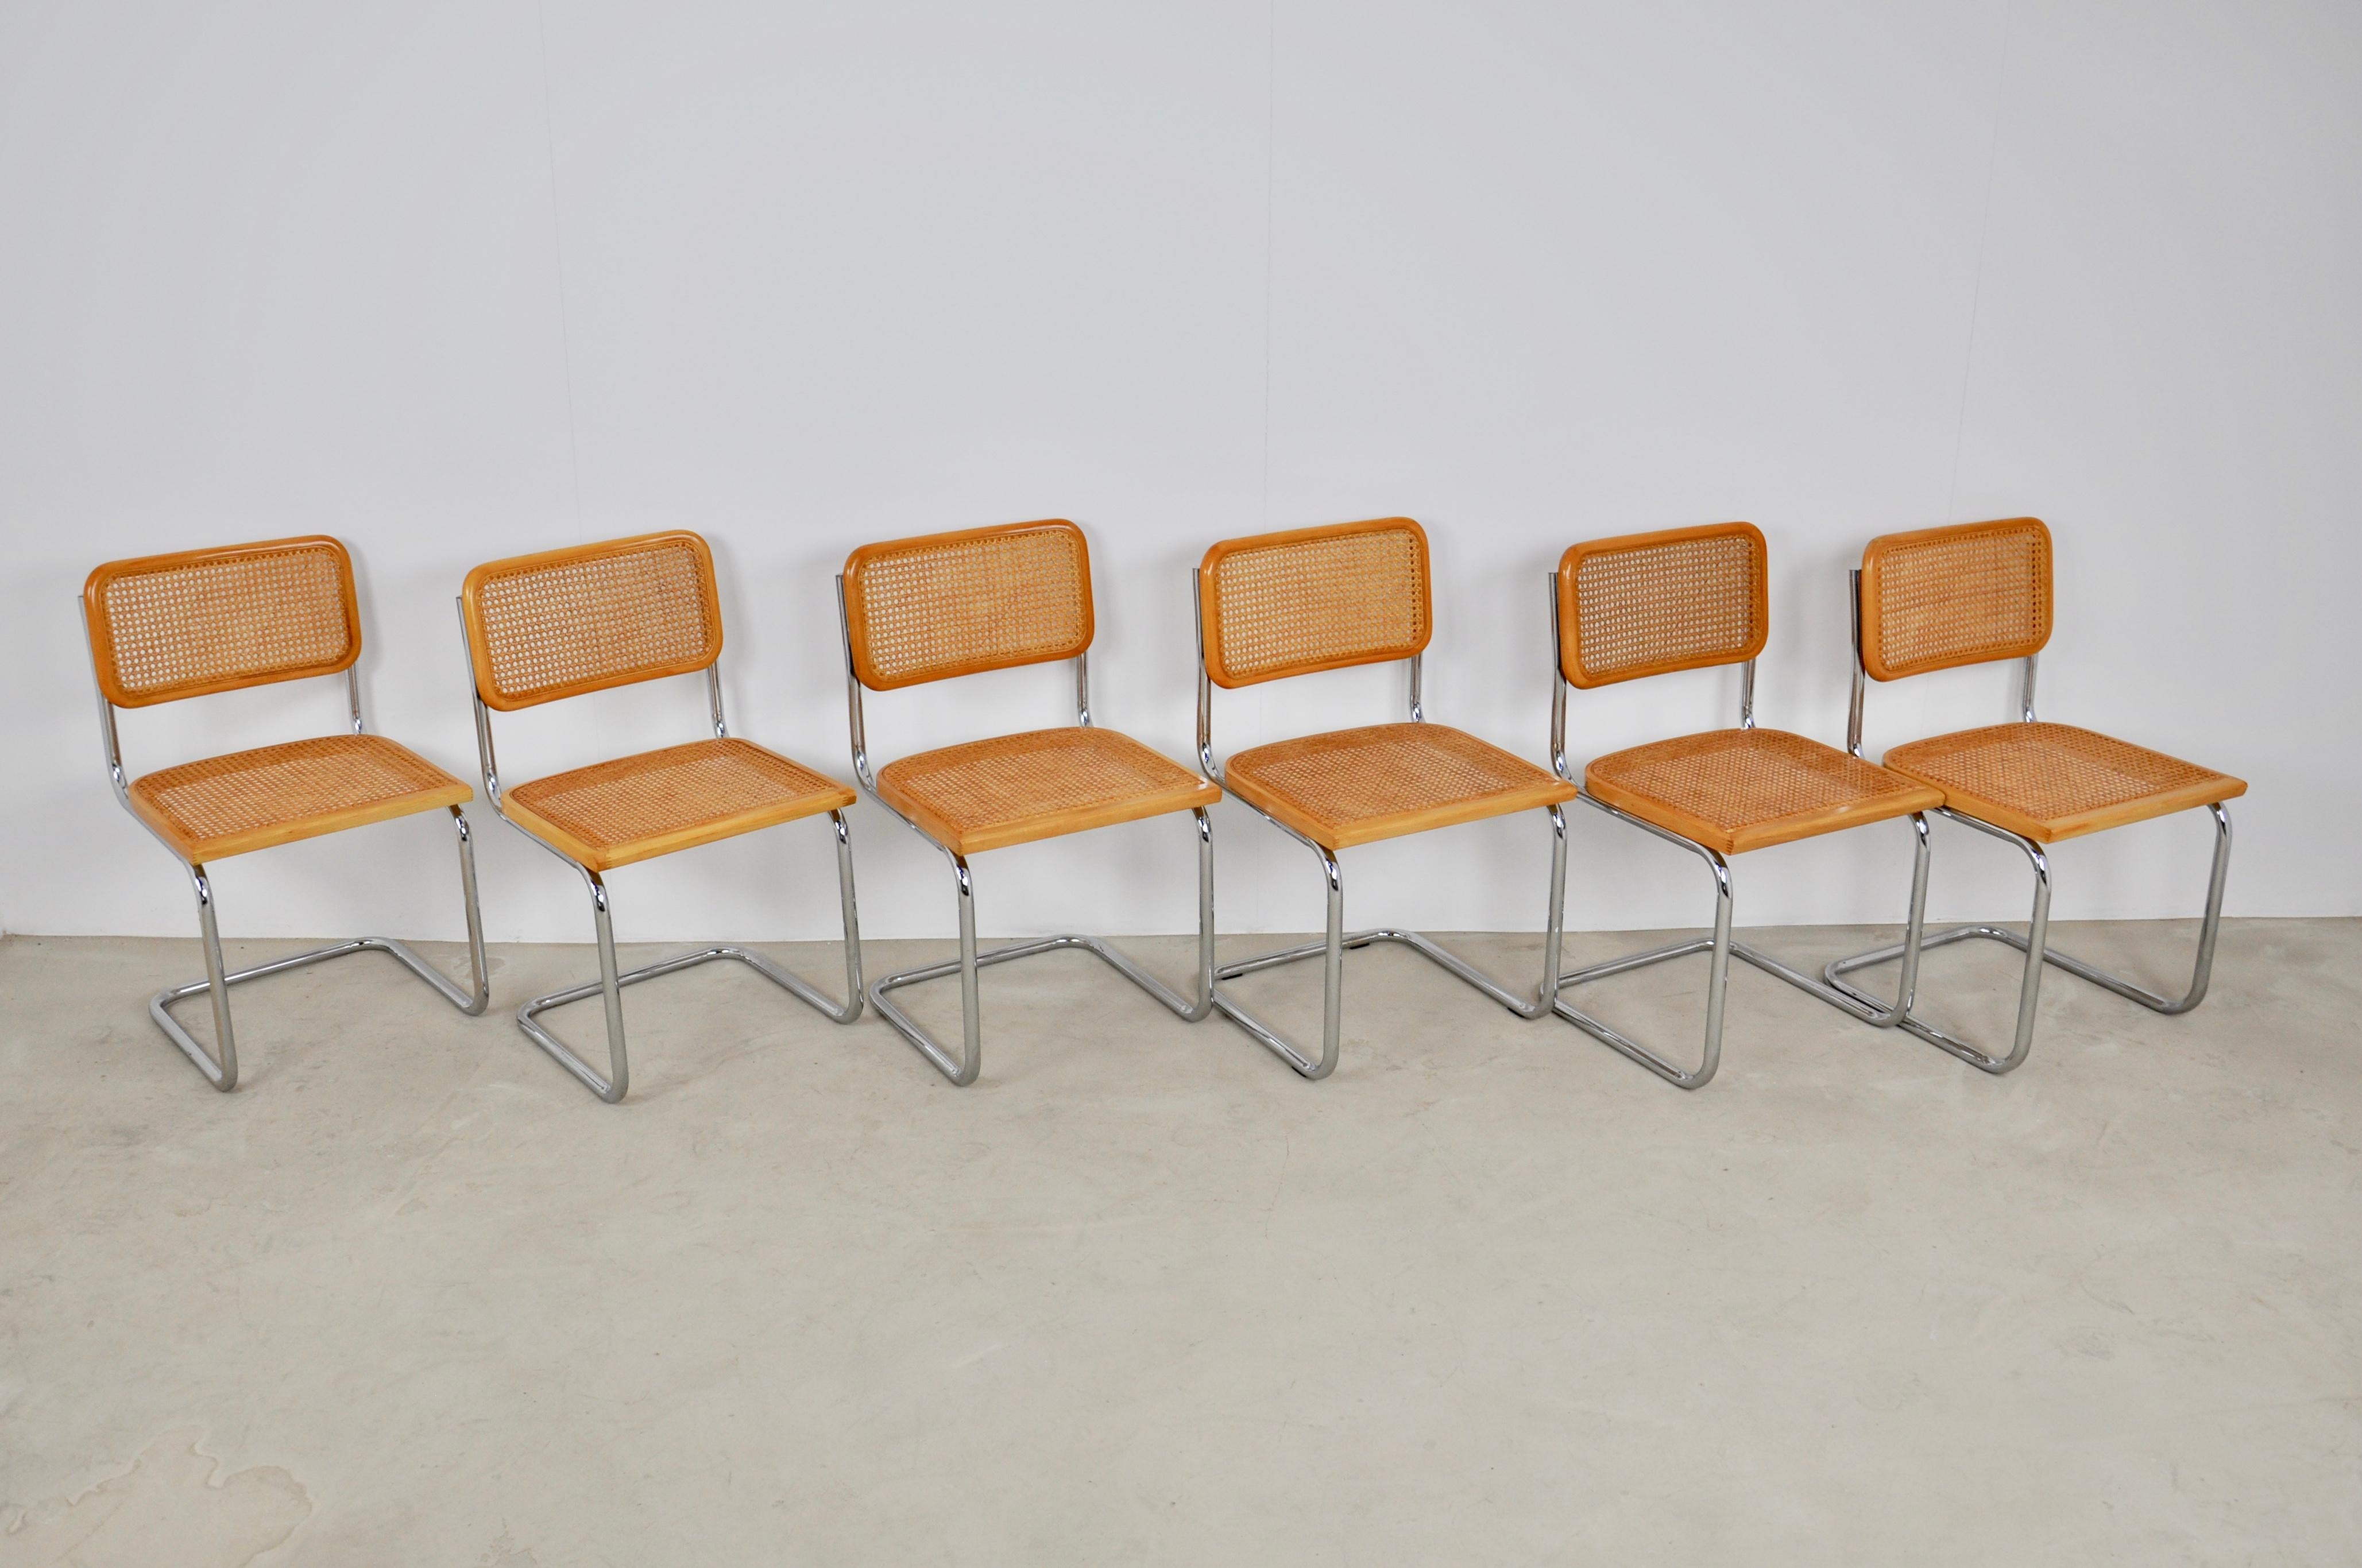 Set of 6 chairs in canagemetal wood. Slight wear due to the time and the age of the chairs. Measure: Seat height 45cm.